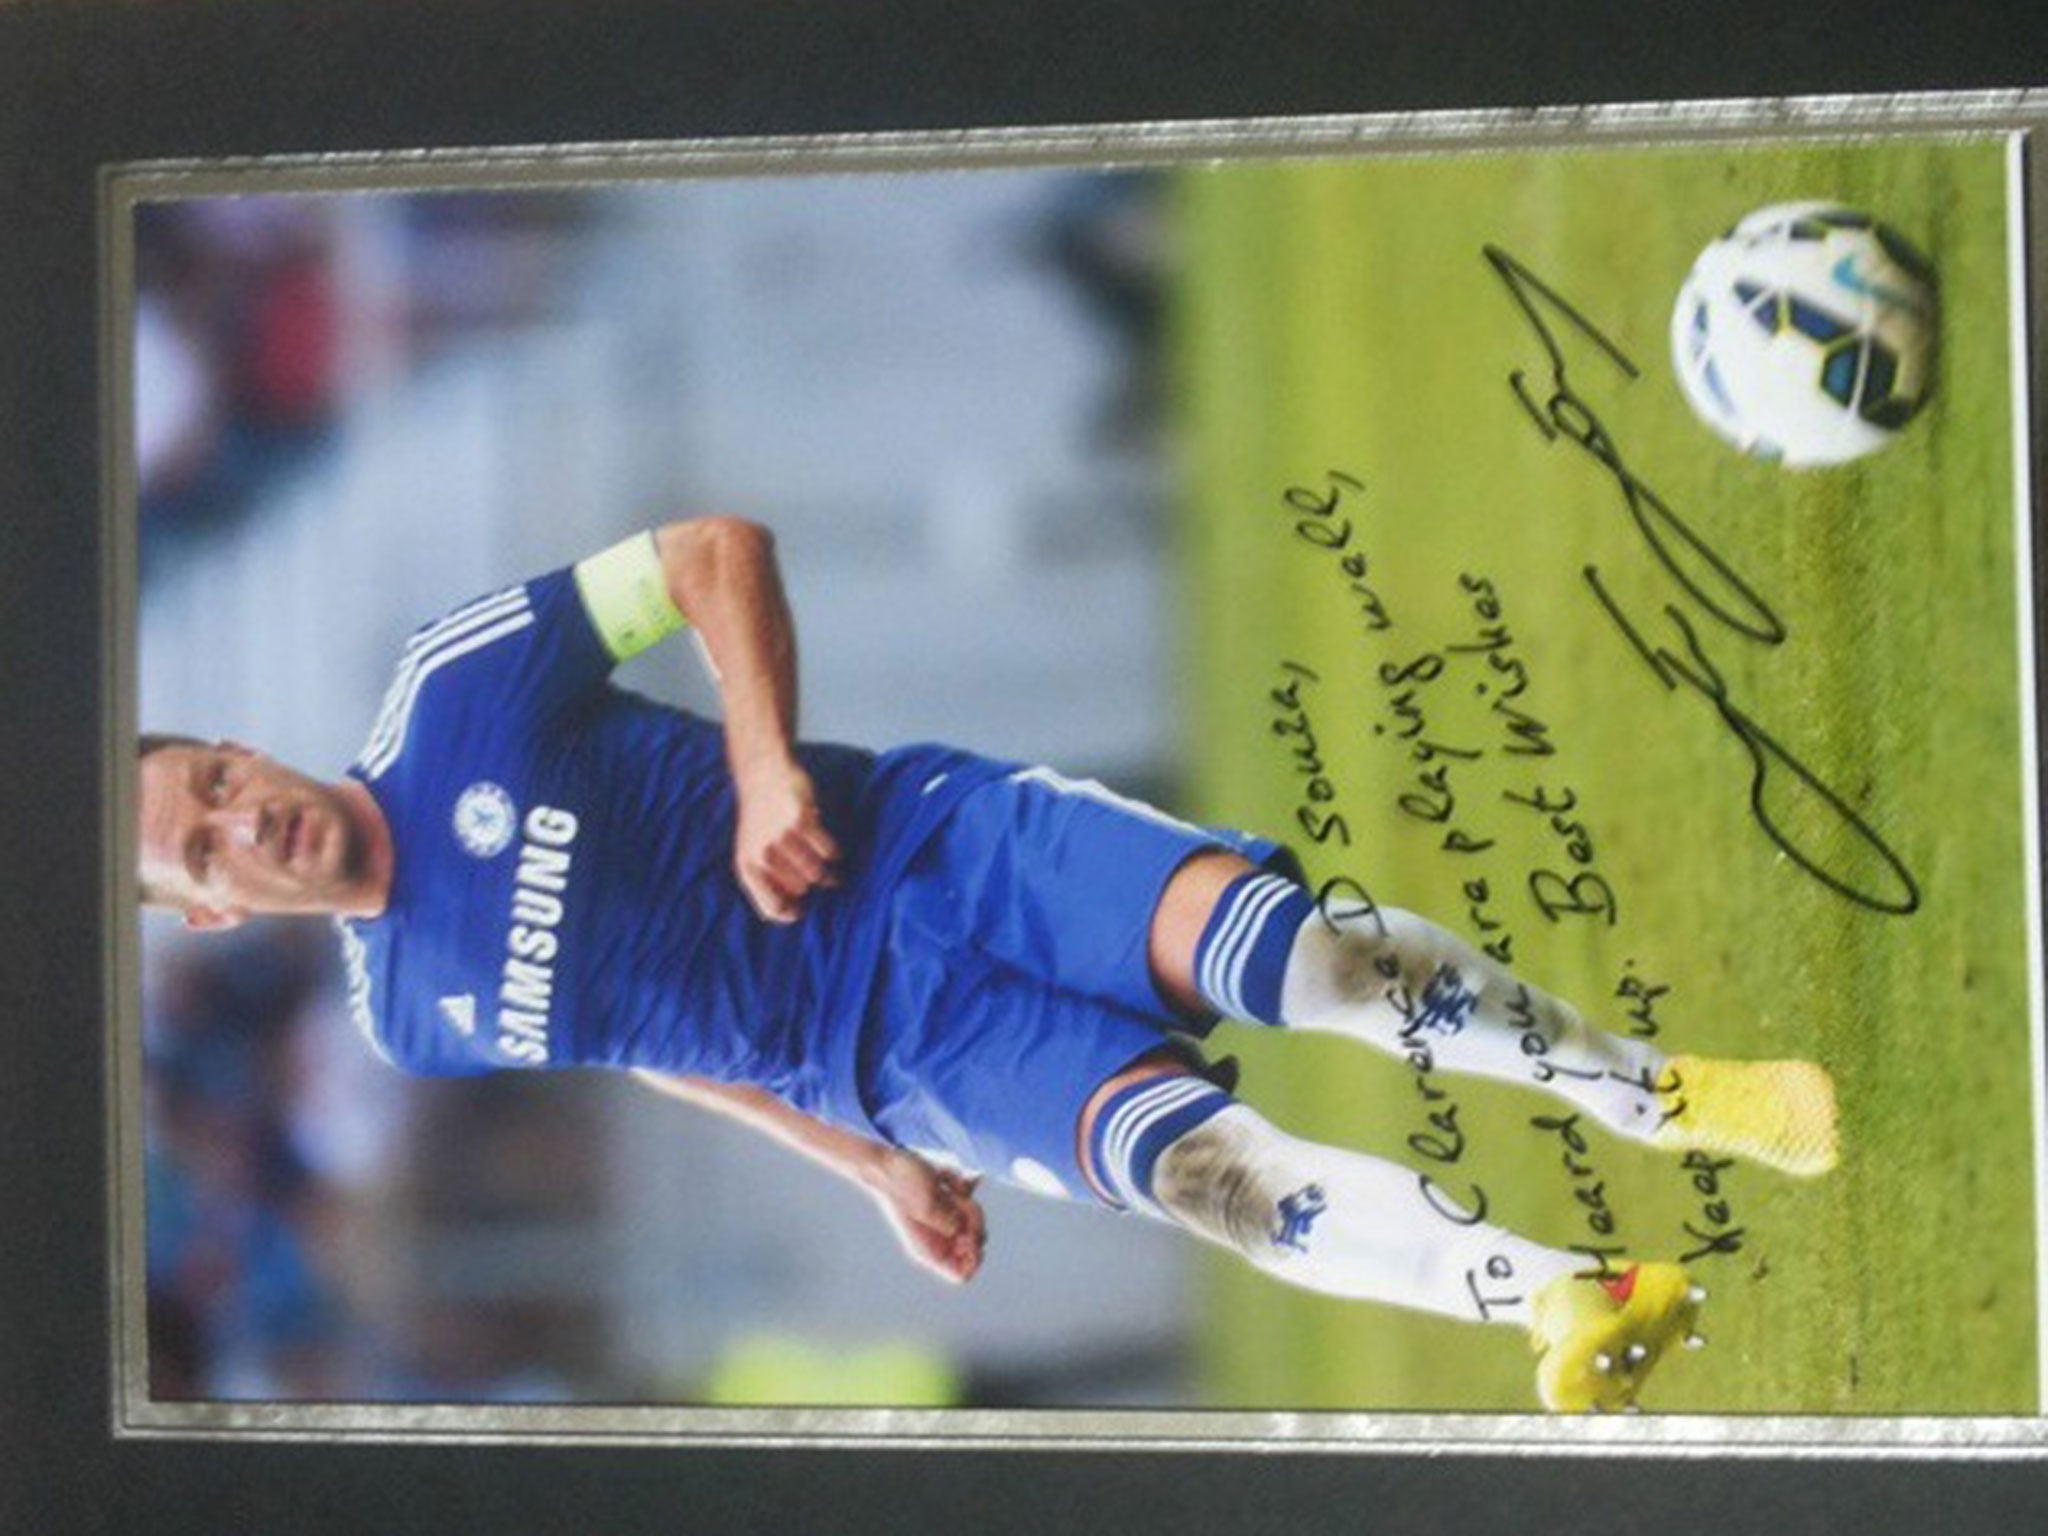 The John Terry autograph, which turned out to computerised